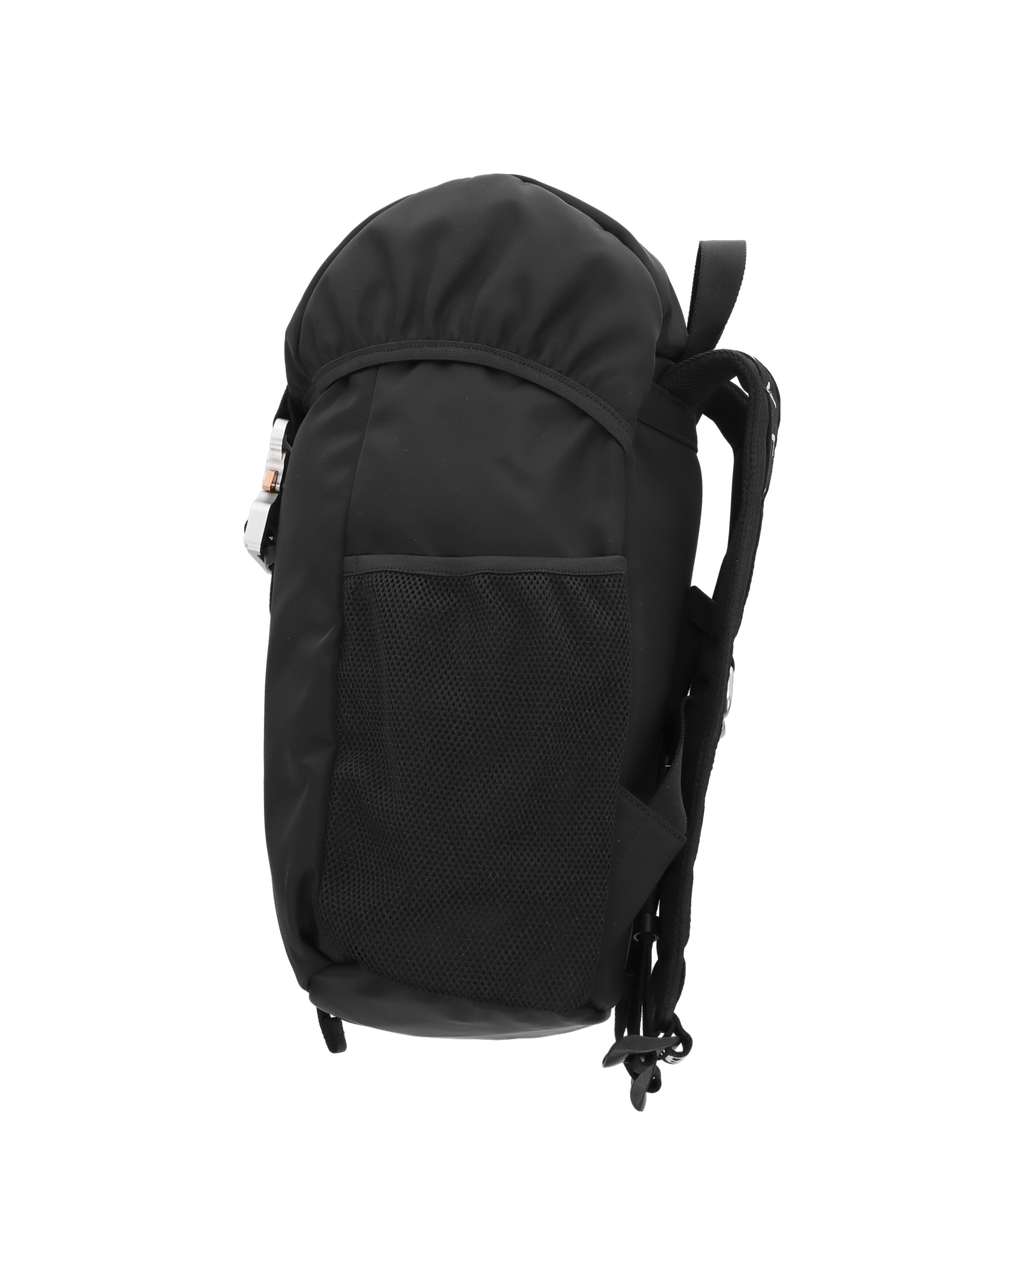 1017 ALYX 9SM Backpack with logo, Men's Bags